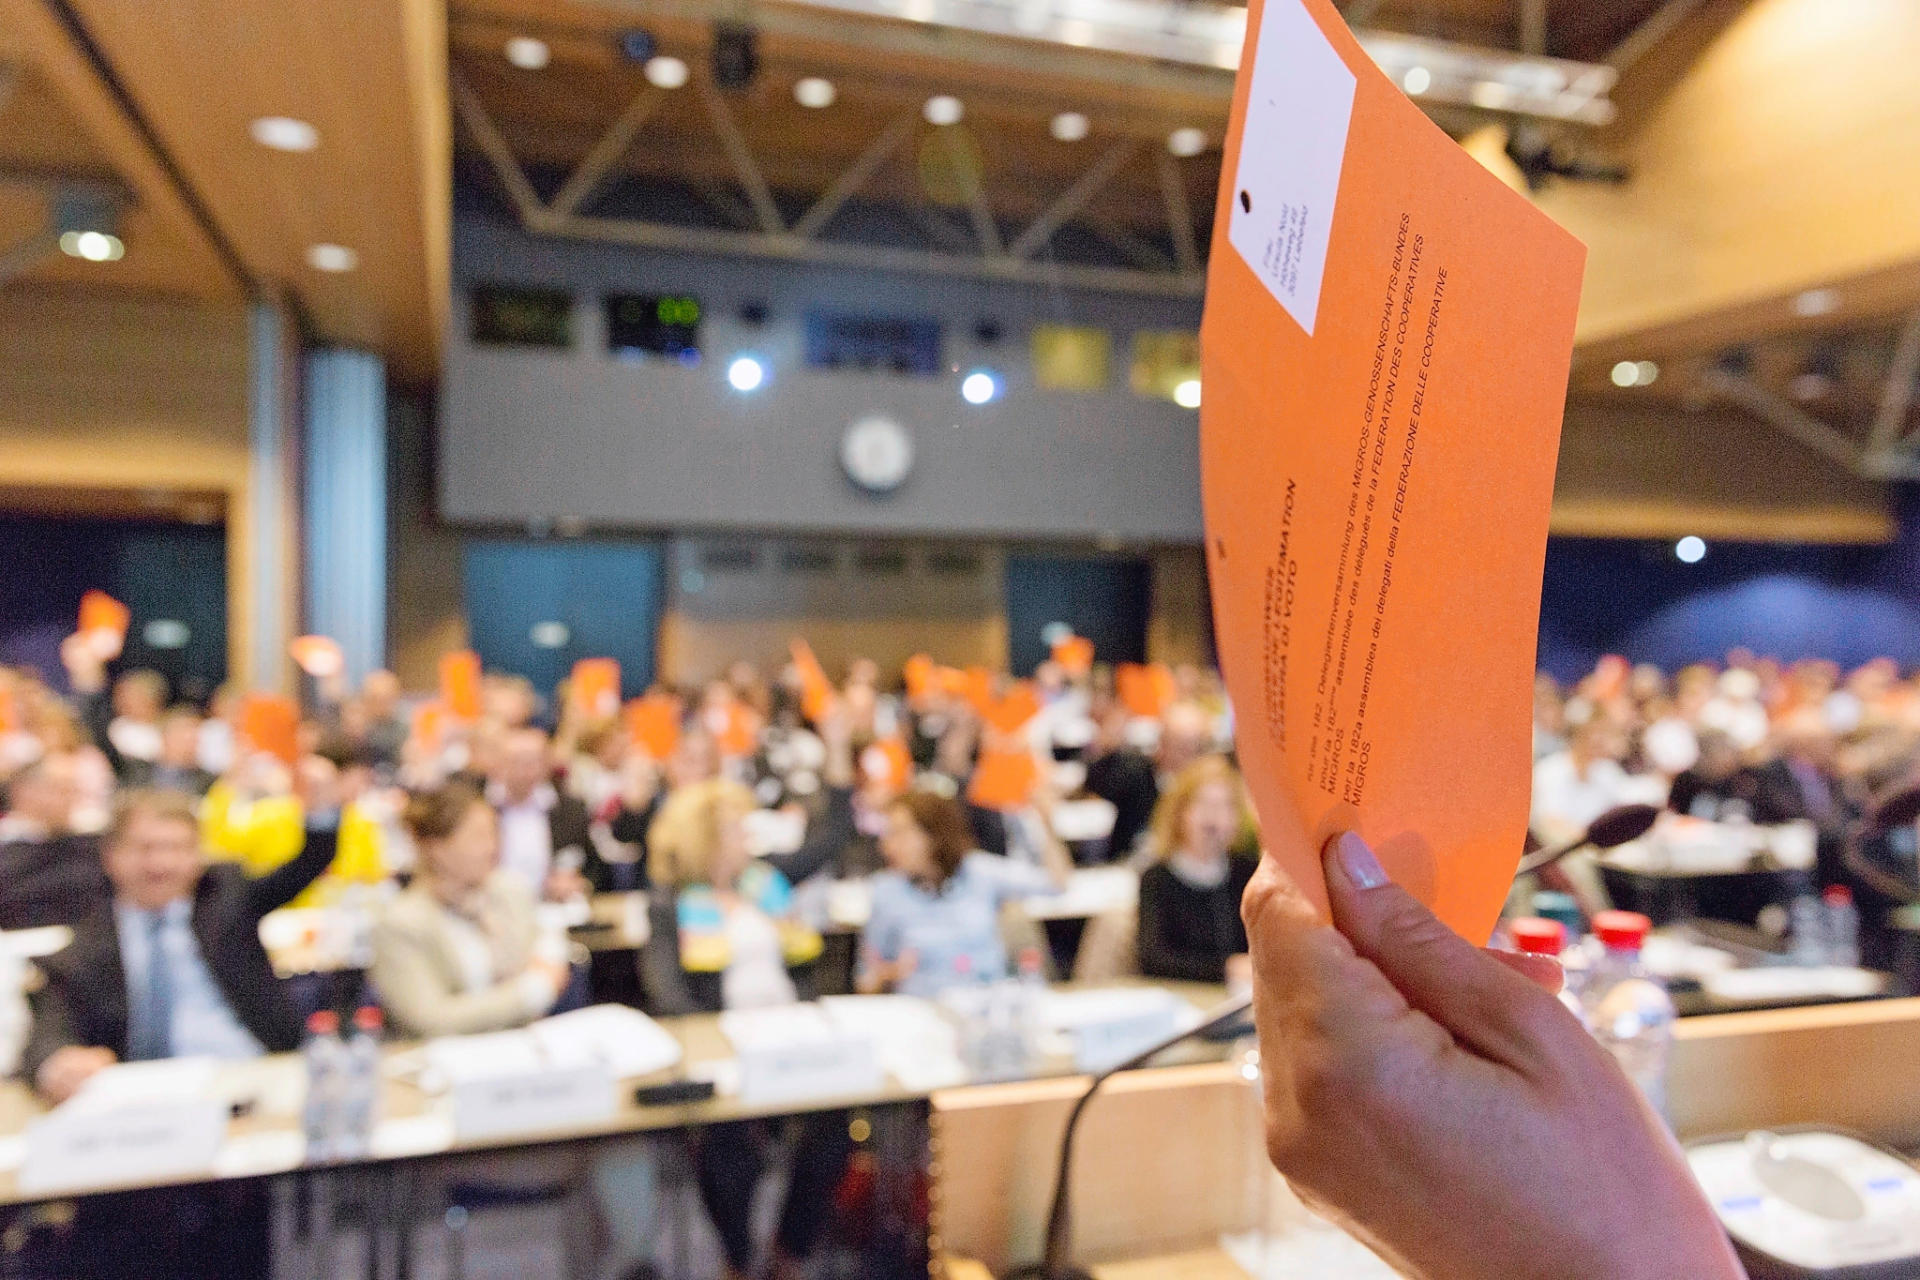 One hand holds an orange ballot paper, members of the Assembly of Delegates in the background.